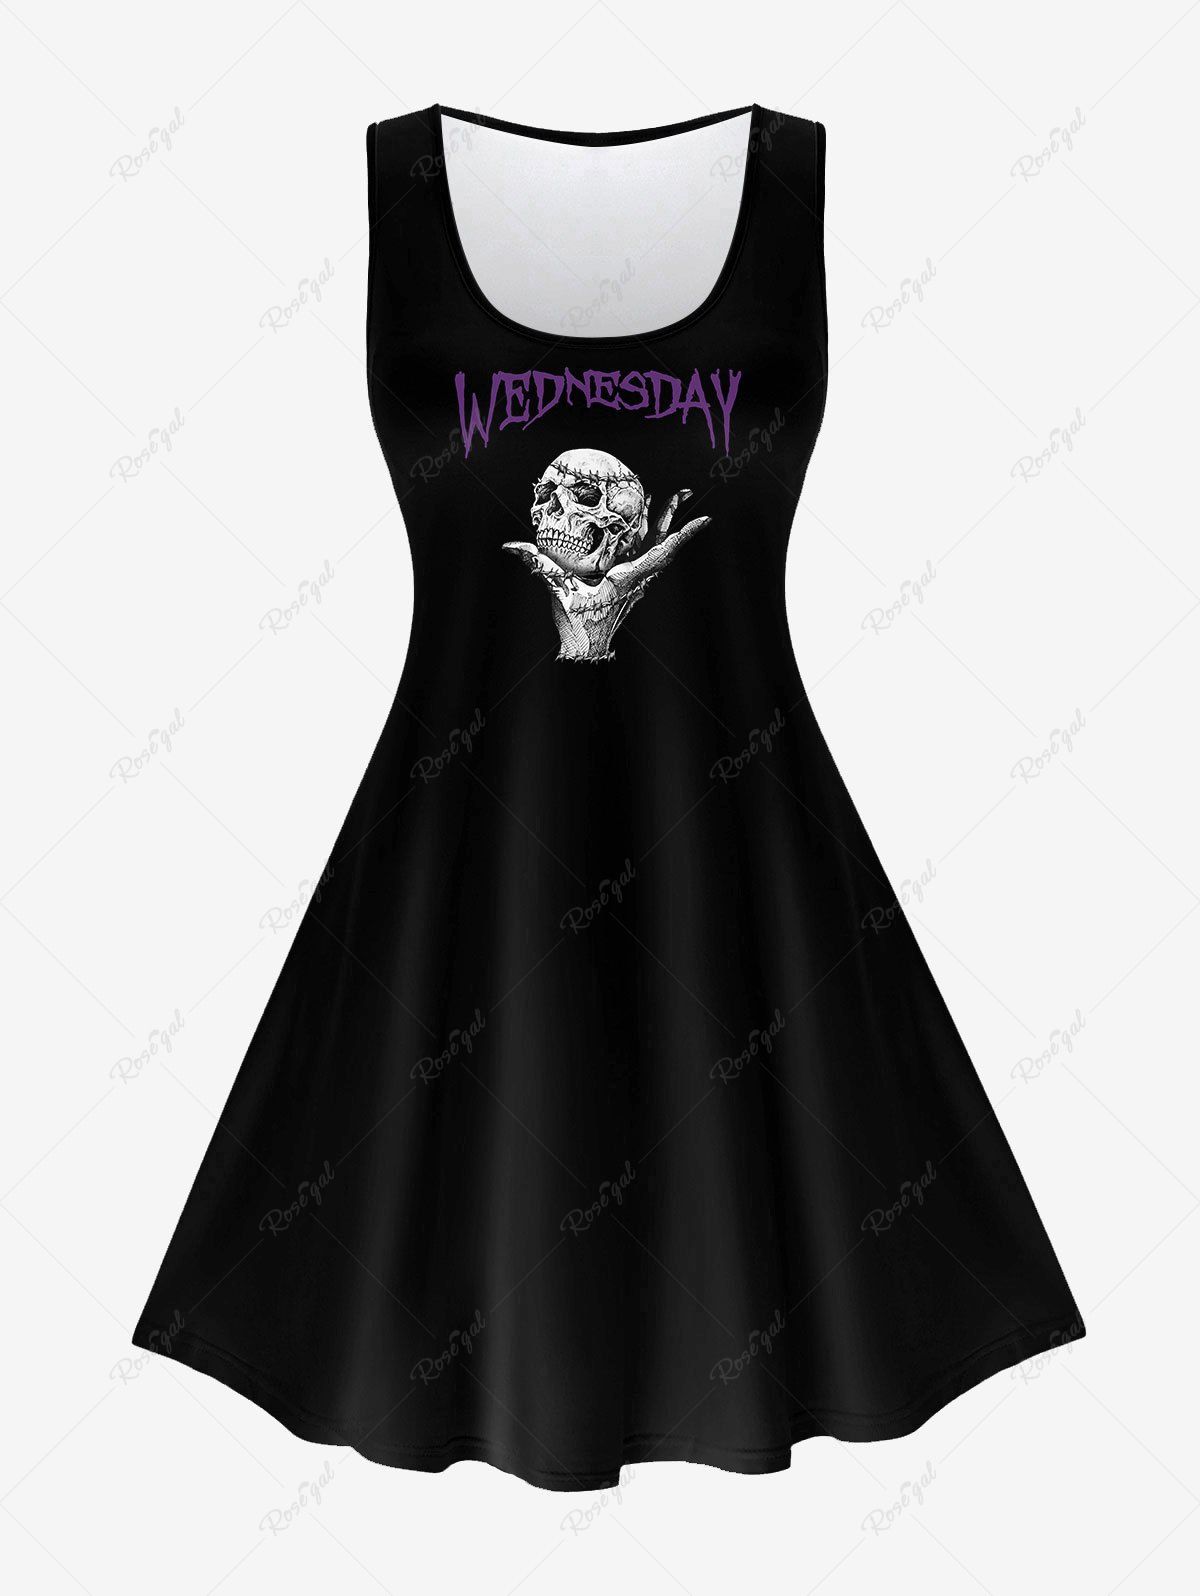 Trendy Gothic Skull Letters Printed Graphic Tank Dress  